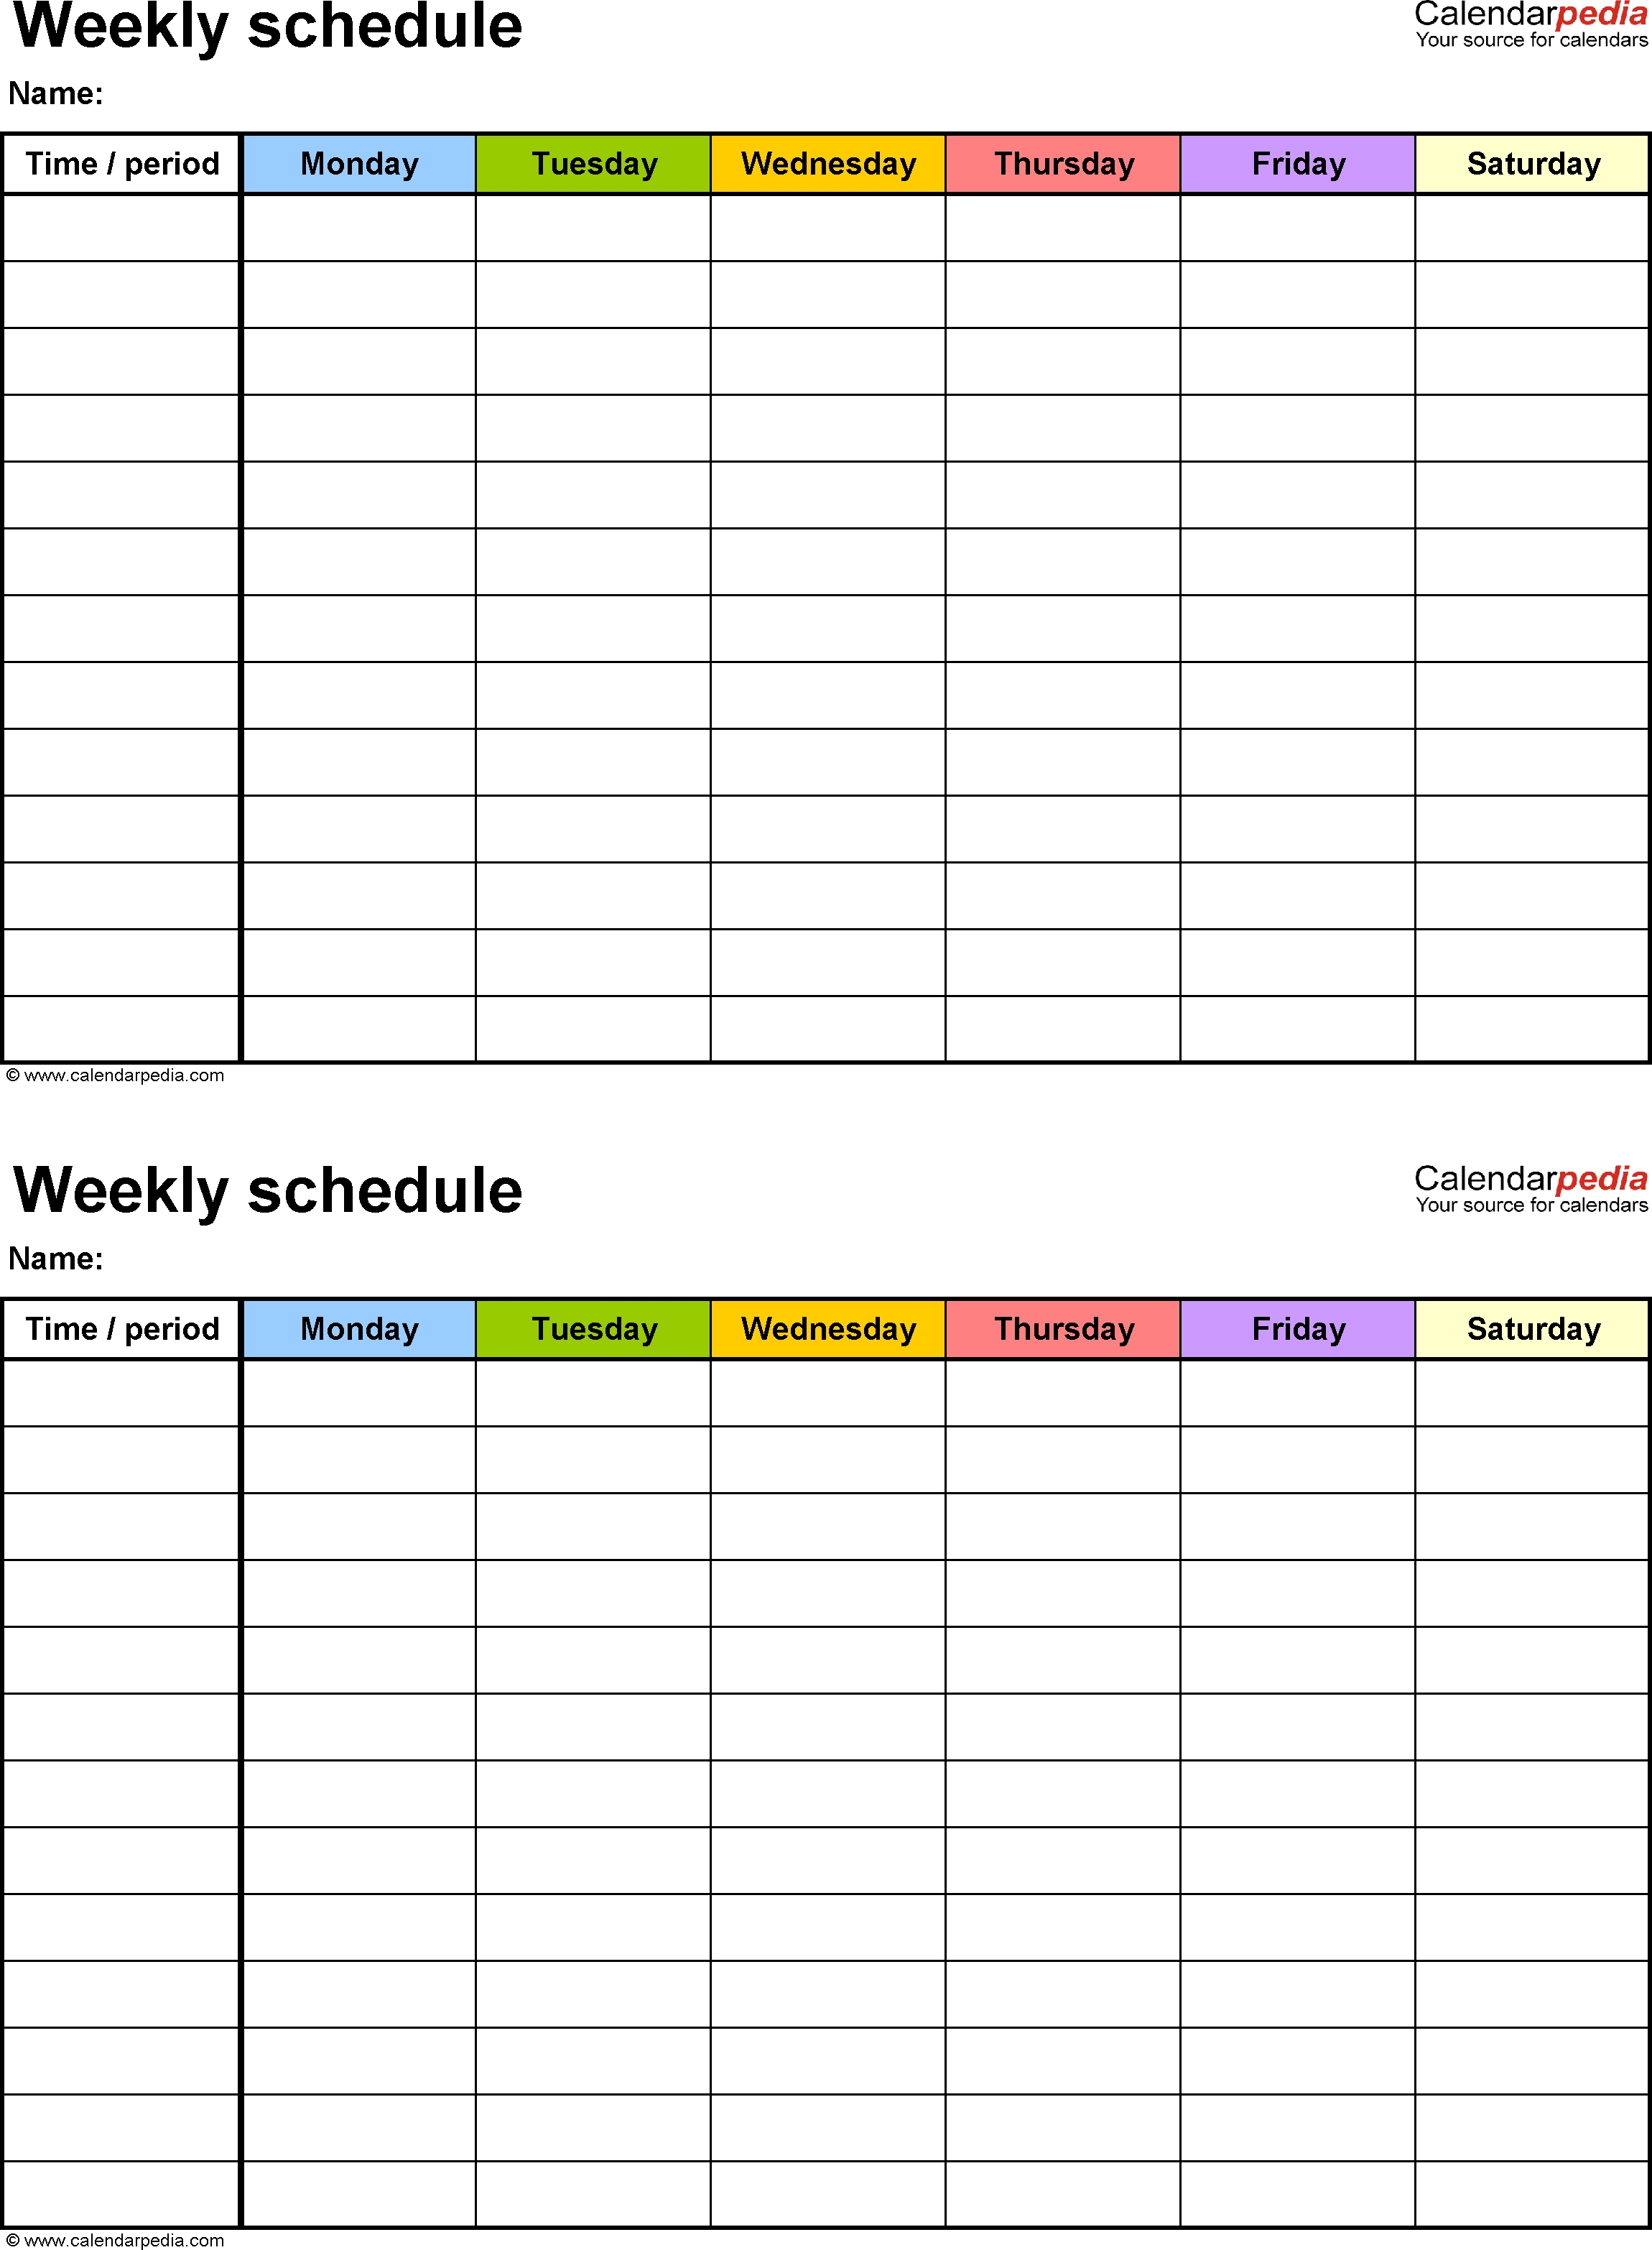 Weekly Schedule Template For Word Version 9: 2 Schedules On One Page regarding Printable Weekly Schedule Monday Through Friday